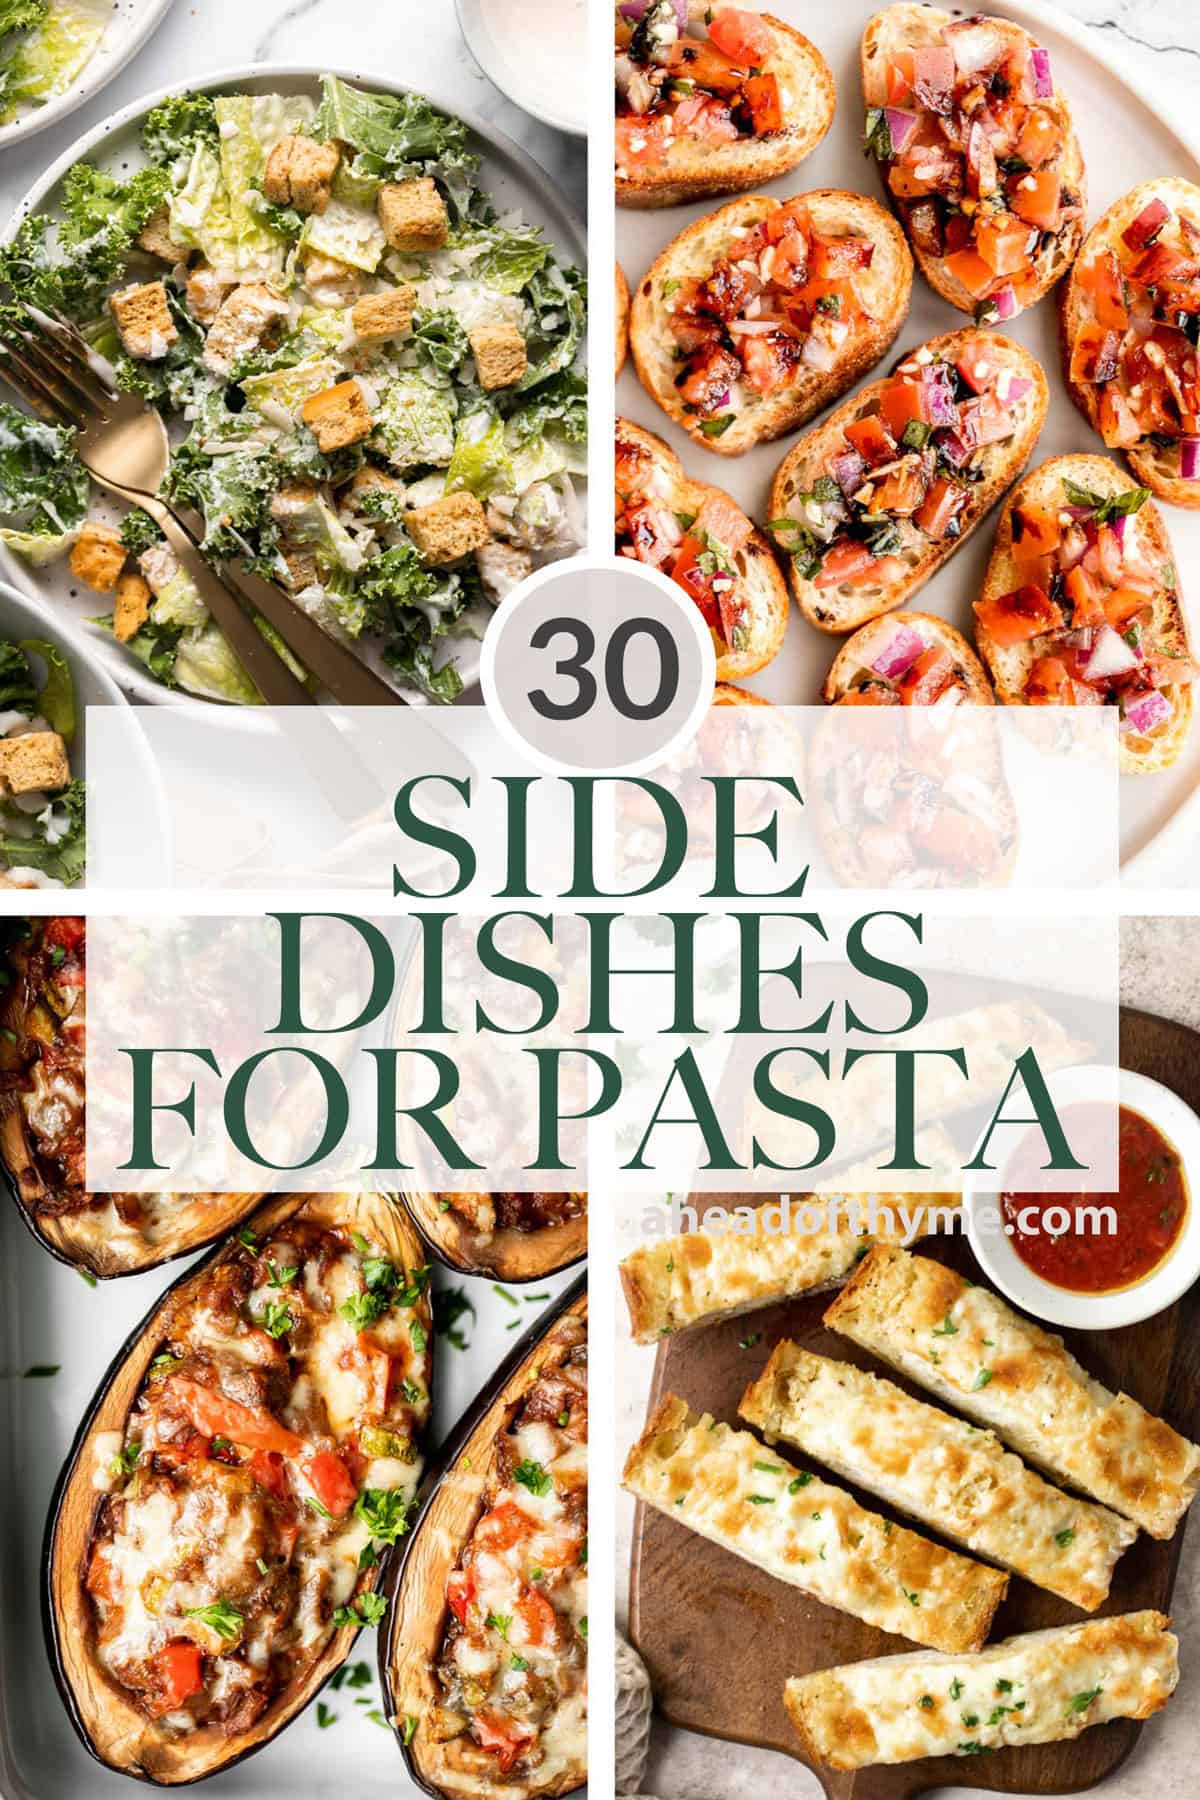 Wondering what to serve with pasta? Browse over 30 of the best side dishes for pasta including salads, crusty breads, roasted vegetables, and more. | aheadofthyme.com